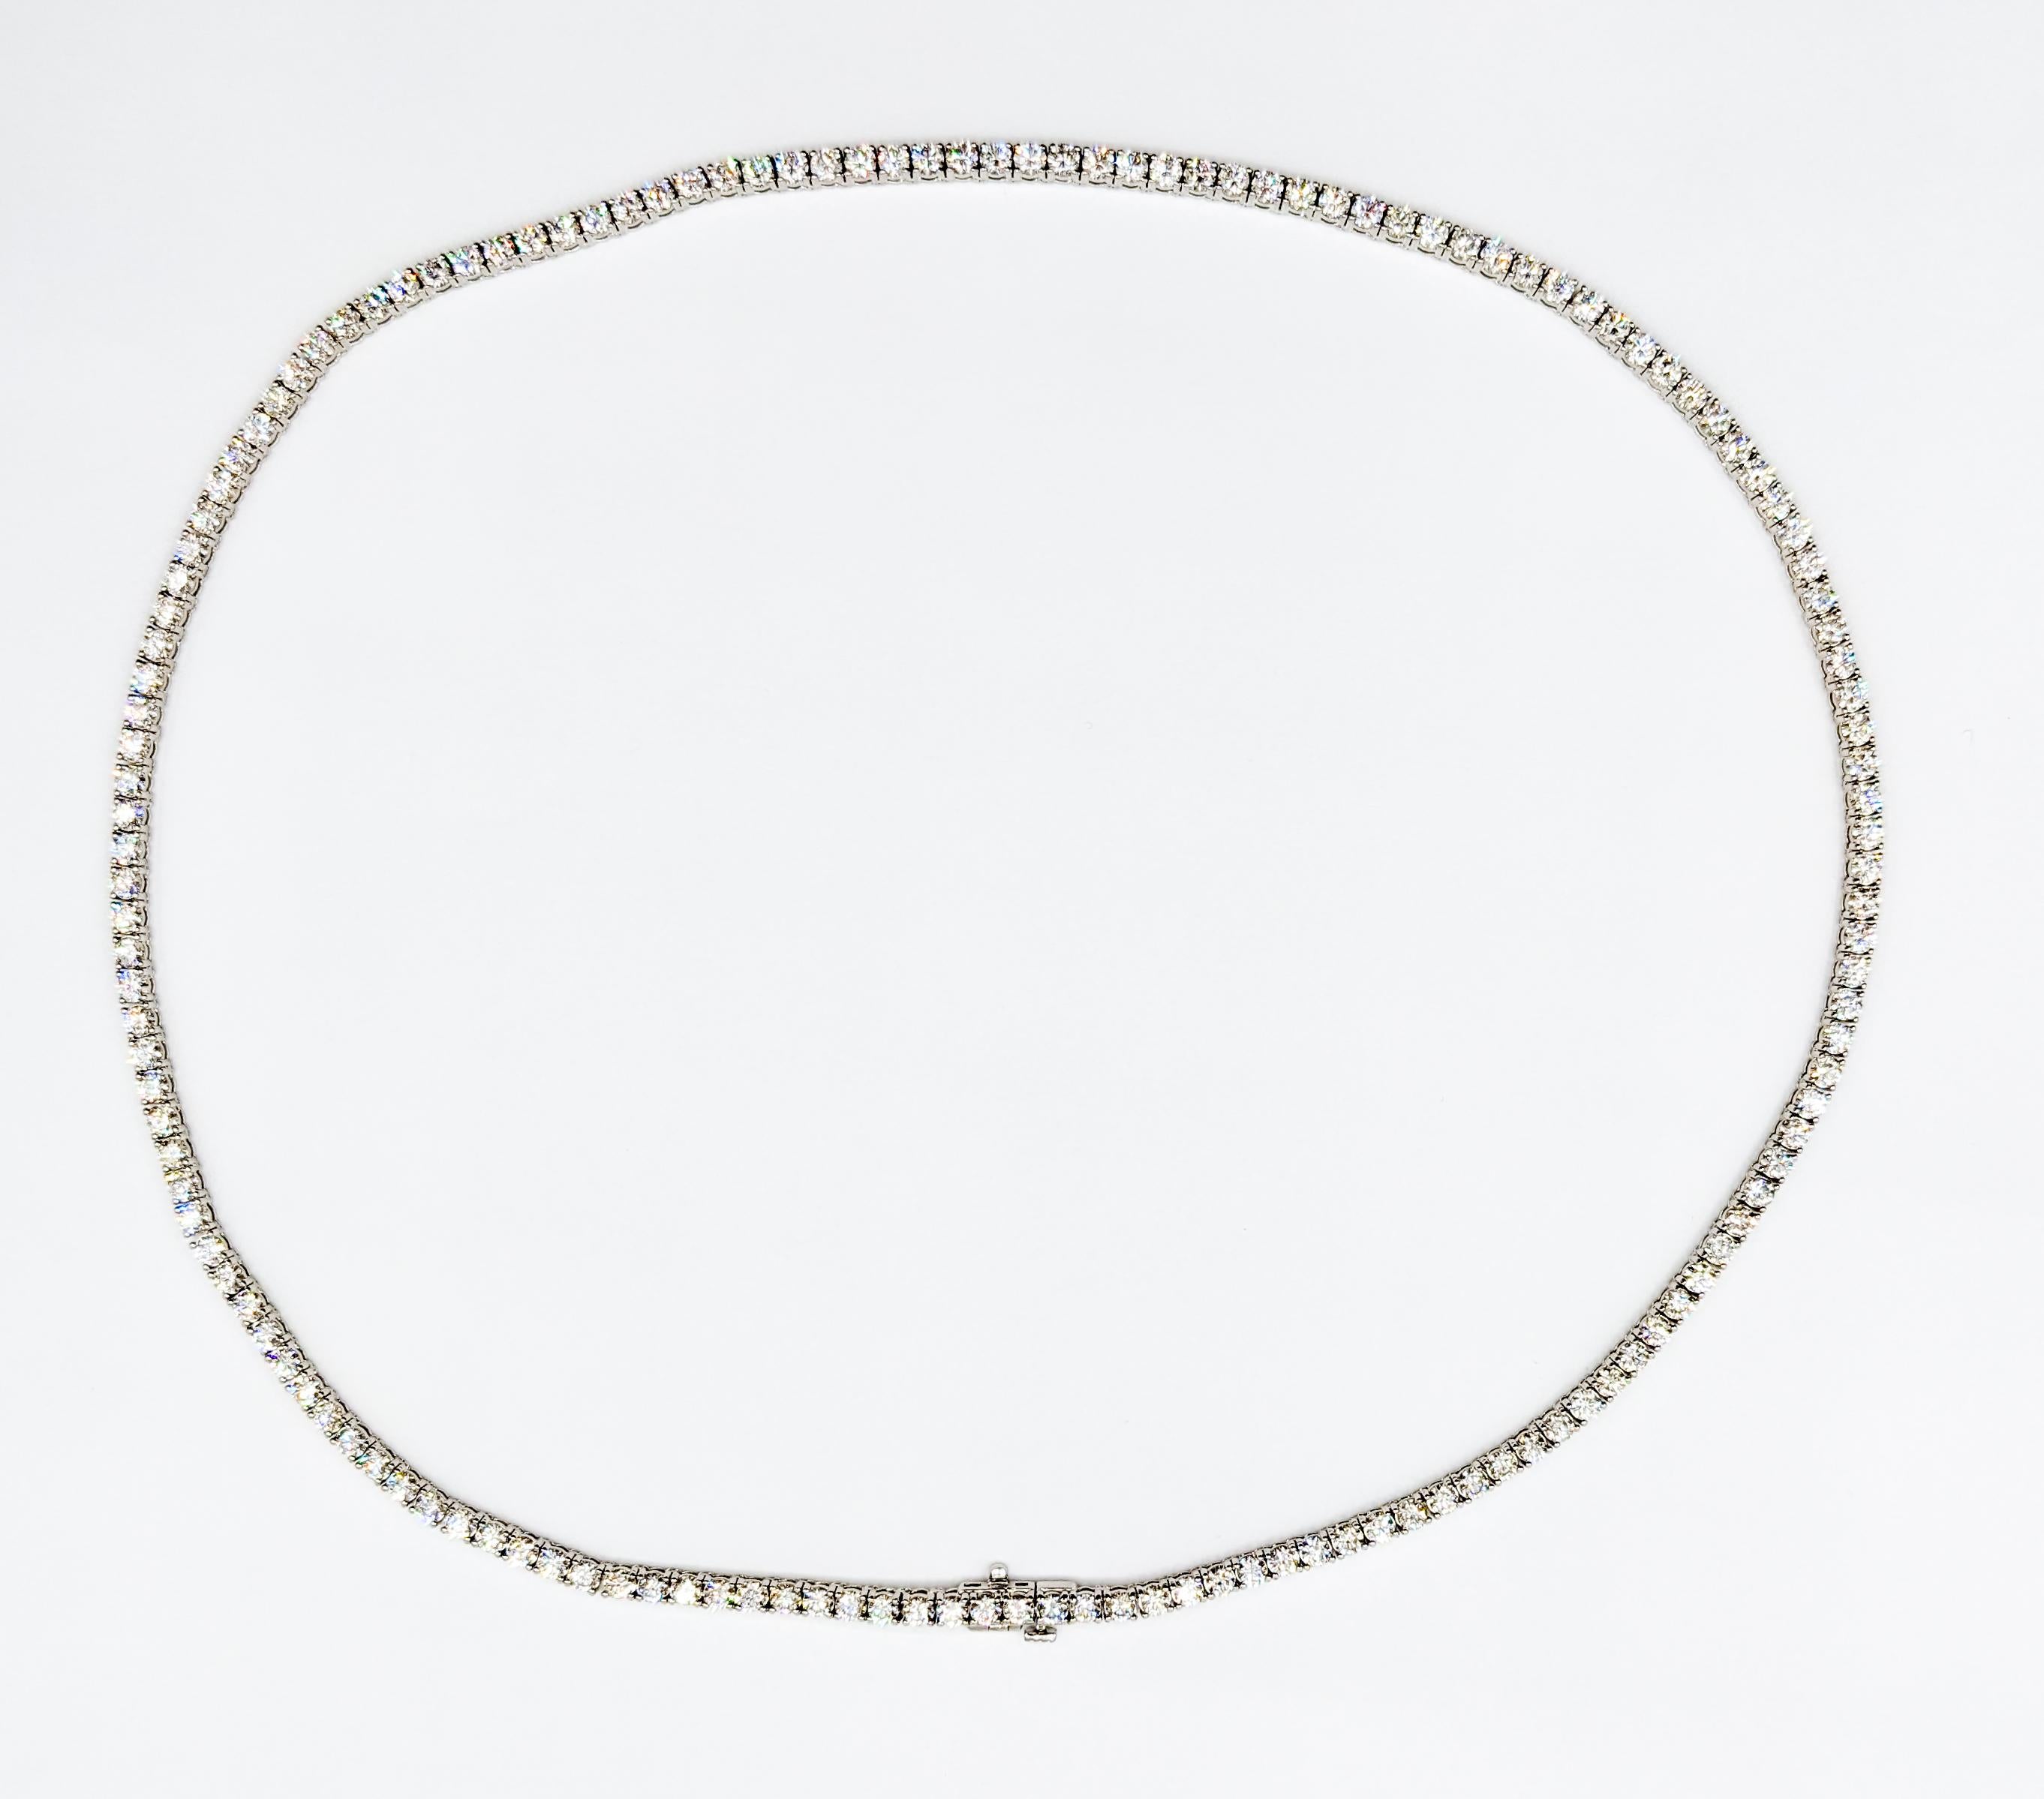 Round Cut Beautiful 16.88ctw Natural Diamond Tennis Necklace in 14Kt White Gold